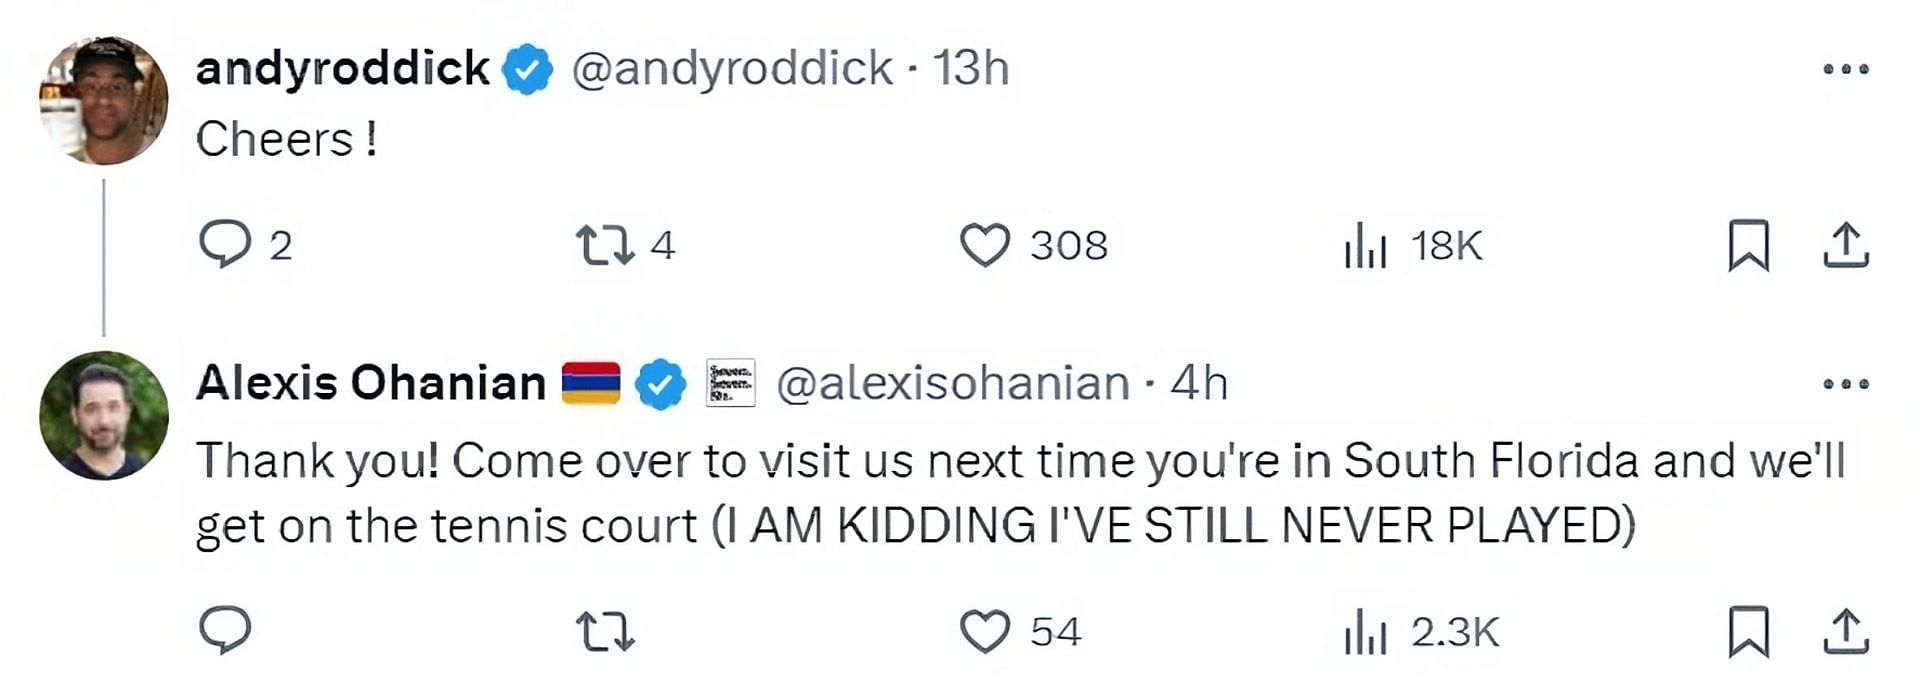 Andy Roddick and Alexis Ohanian on X (formerly Twitter)